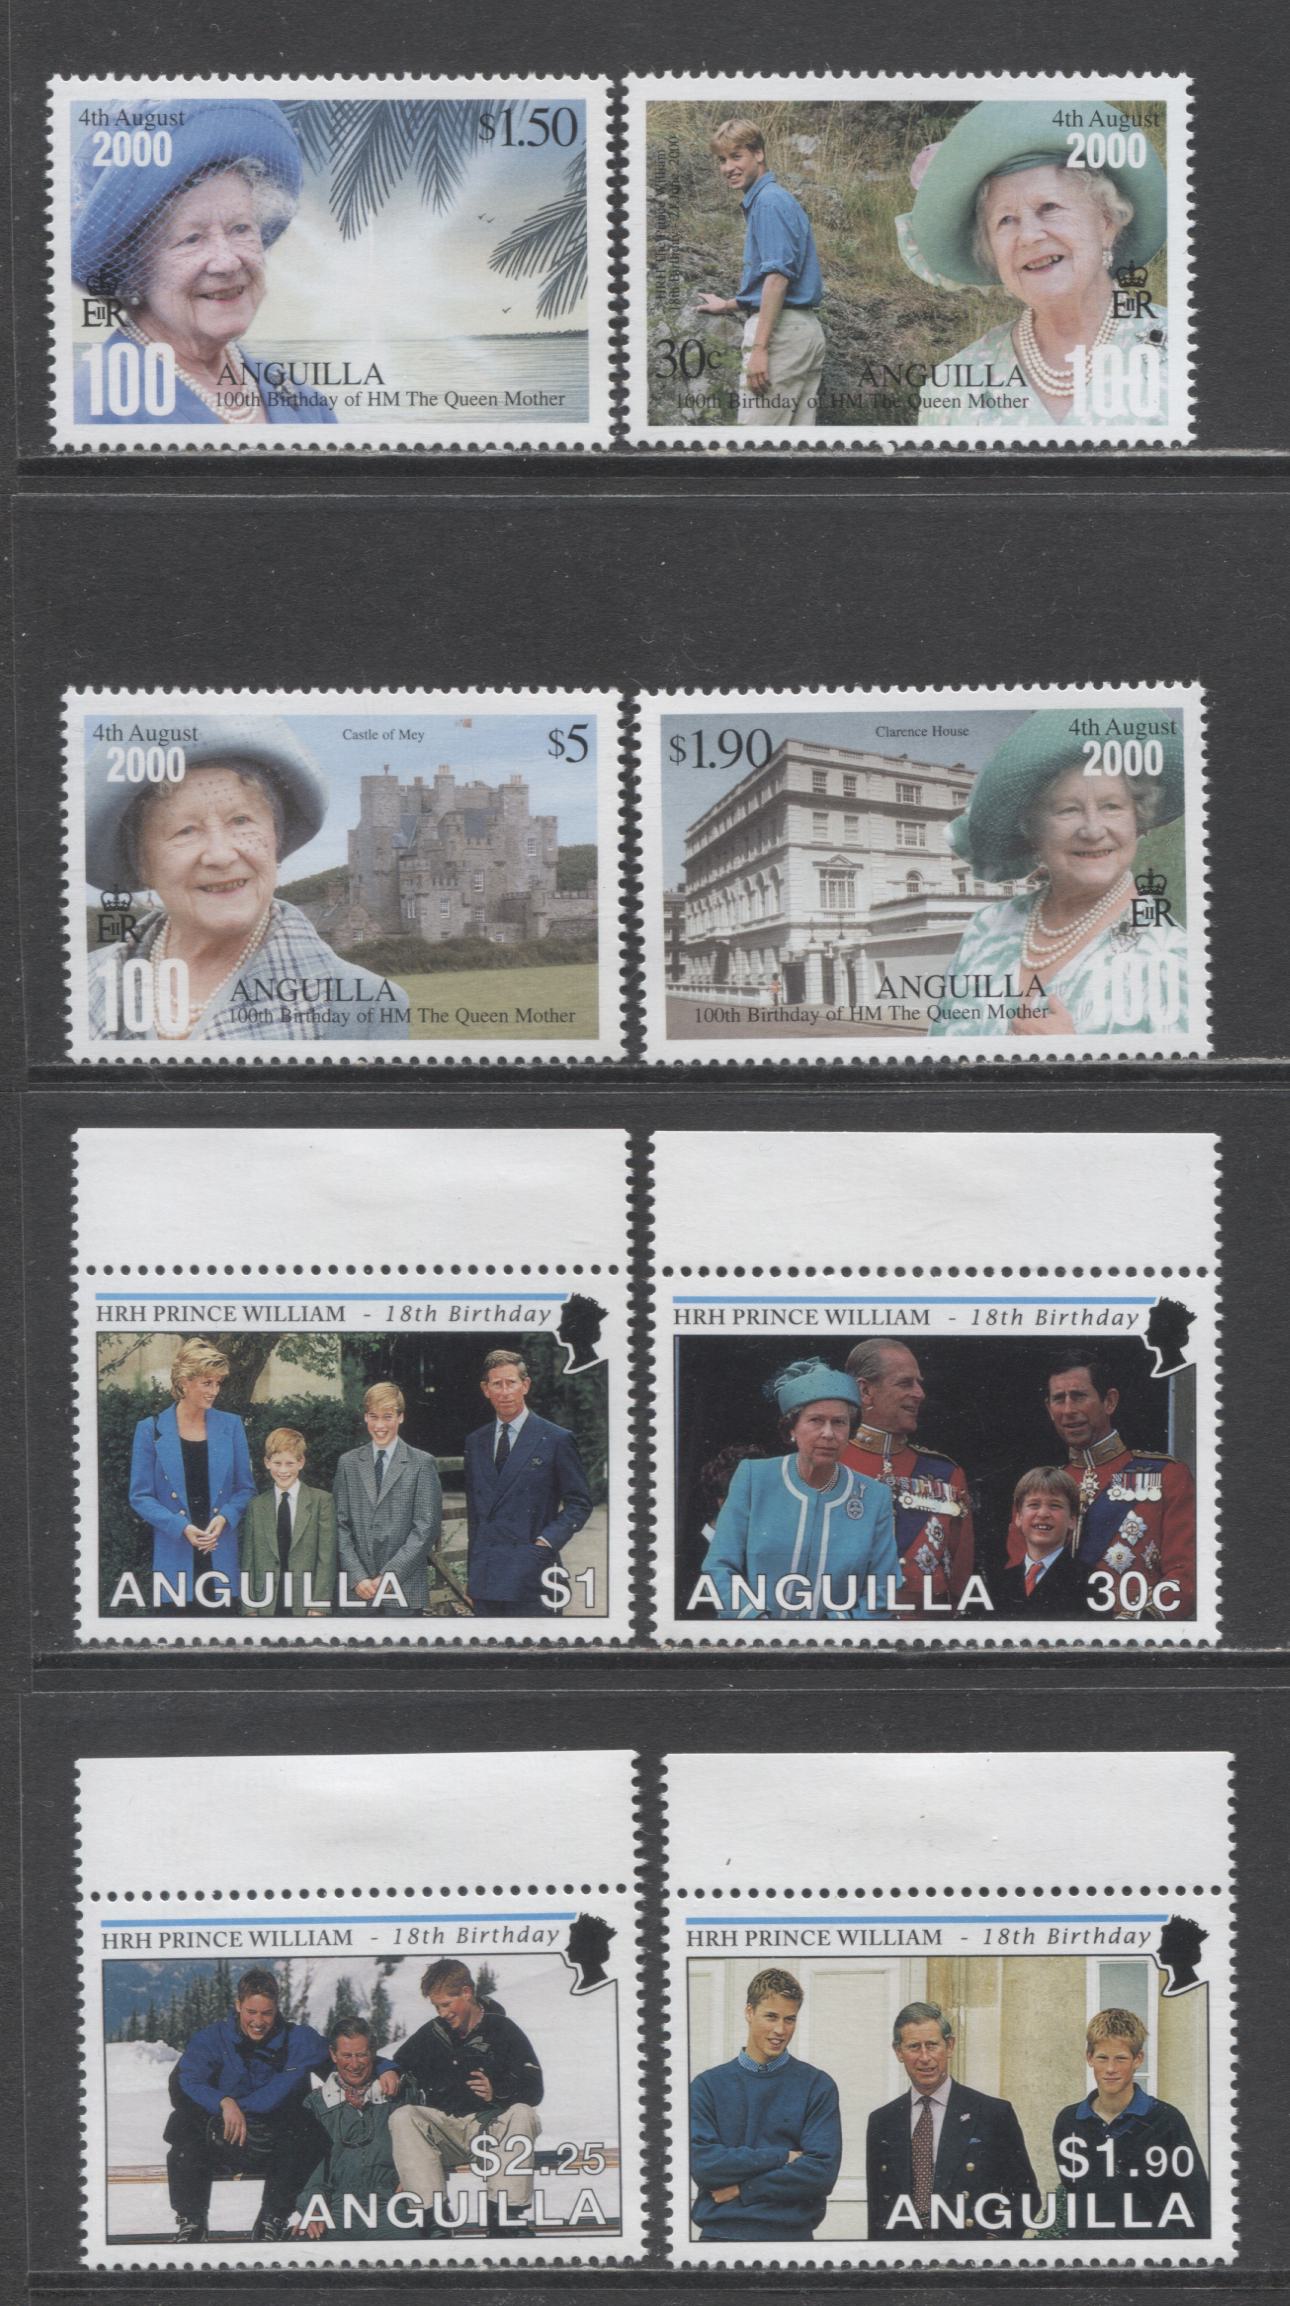 Lot 7 Anguilla SC#1019/1027 2000 Prince William 17th & Queen Mother 100th Issues, 8 VFNH Singles, Click on Listing to See ALL Pictures, 2017 Scott Cat. $18.75